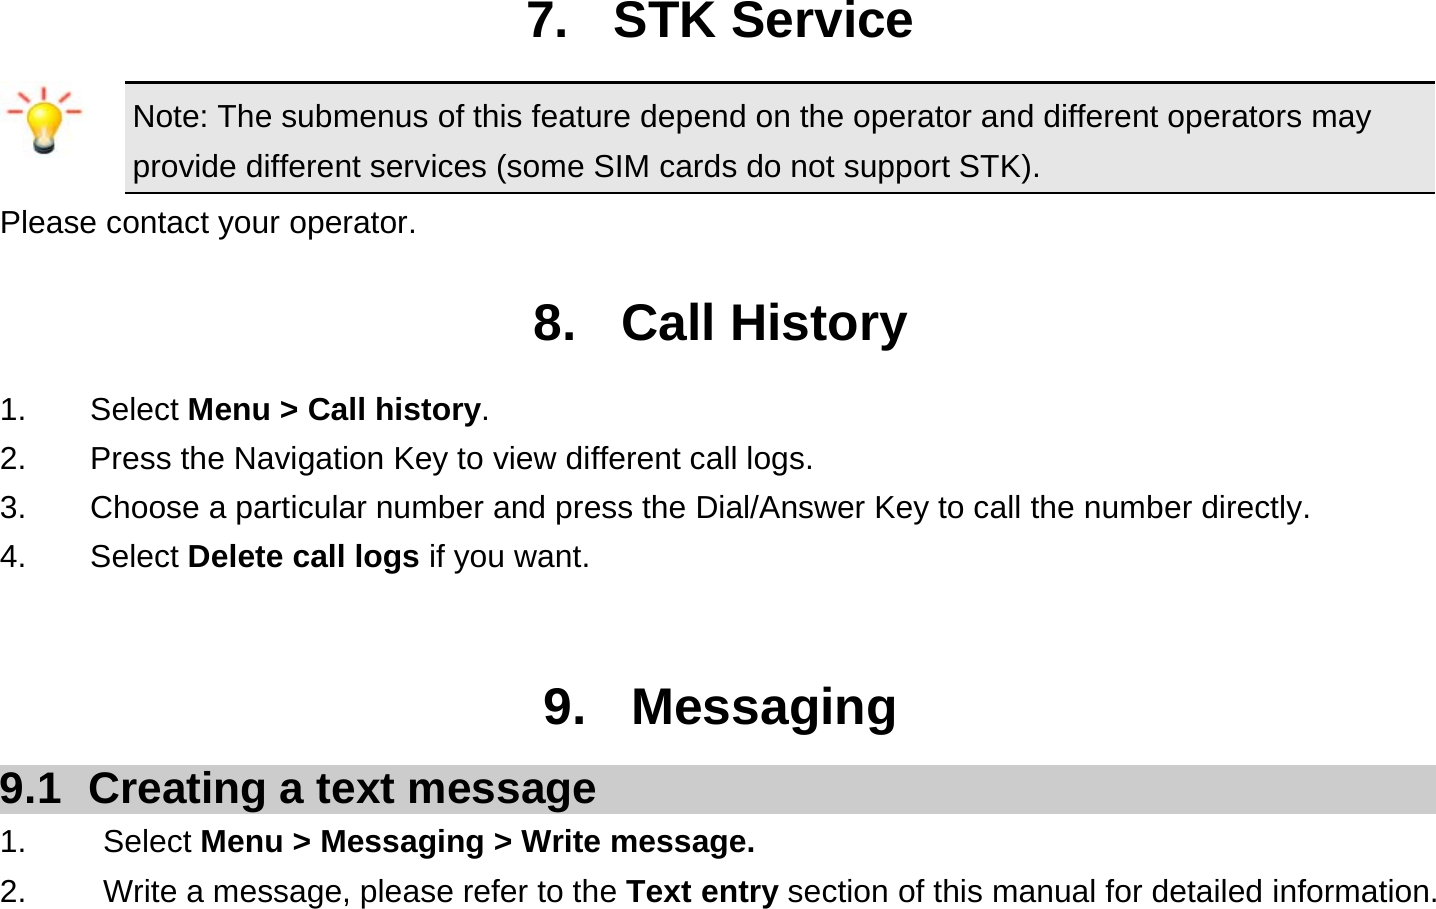  7. STK Service Note: The submenus of this feature depend on the operator and different operators may provide different services (some SIM cards do not support STK). Please contact your operator.  8. Call History 1.    Select Menu &gt; Call history. 2.        Press the Navigation Key to view different call logs. 3.    Choose a particular number and press the Dial/Answer Key to call the number directly. 4.    Select Delete call logs if you want.   9. Messaging 9.1  Creating a text message 1.   Select Menu &gt; Messaging &gt; Write message. 2.    Write a message, please refer to the Text entry section of this manual for detailed information. 